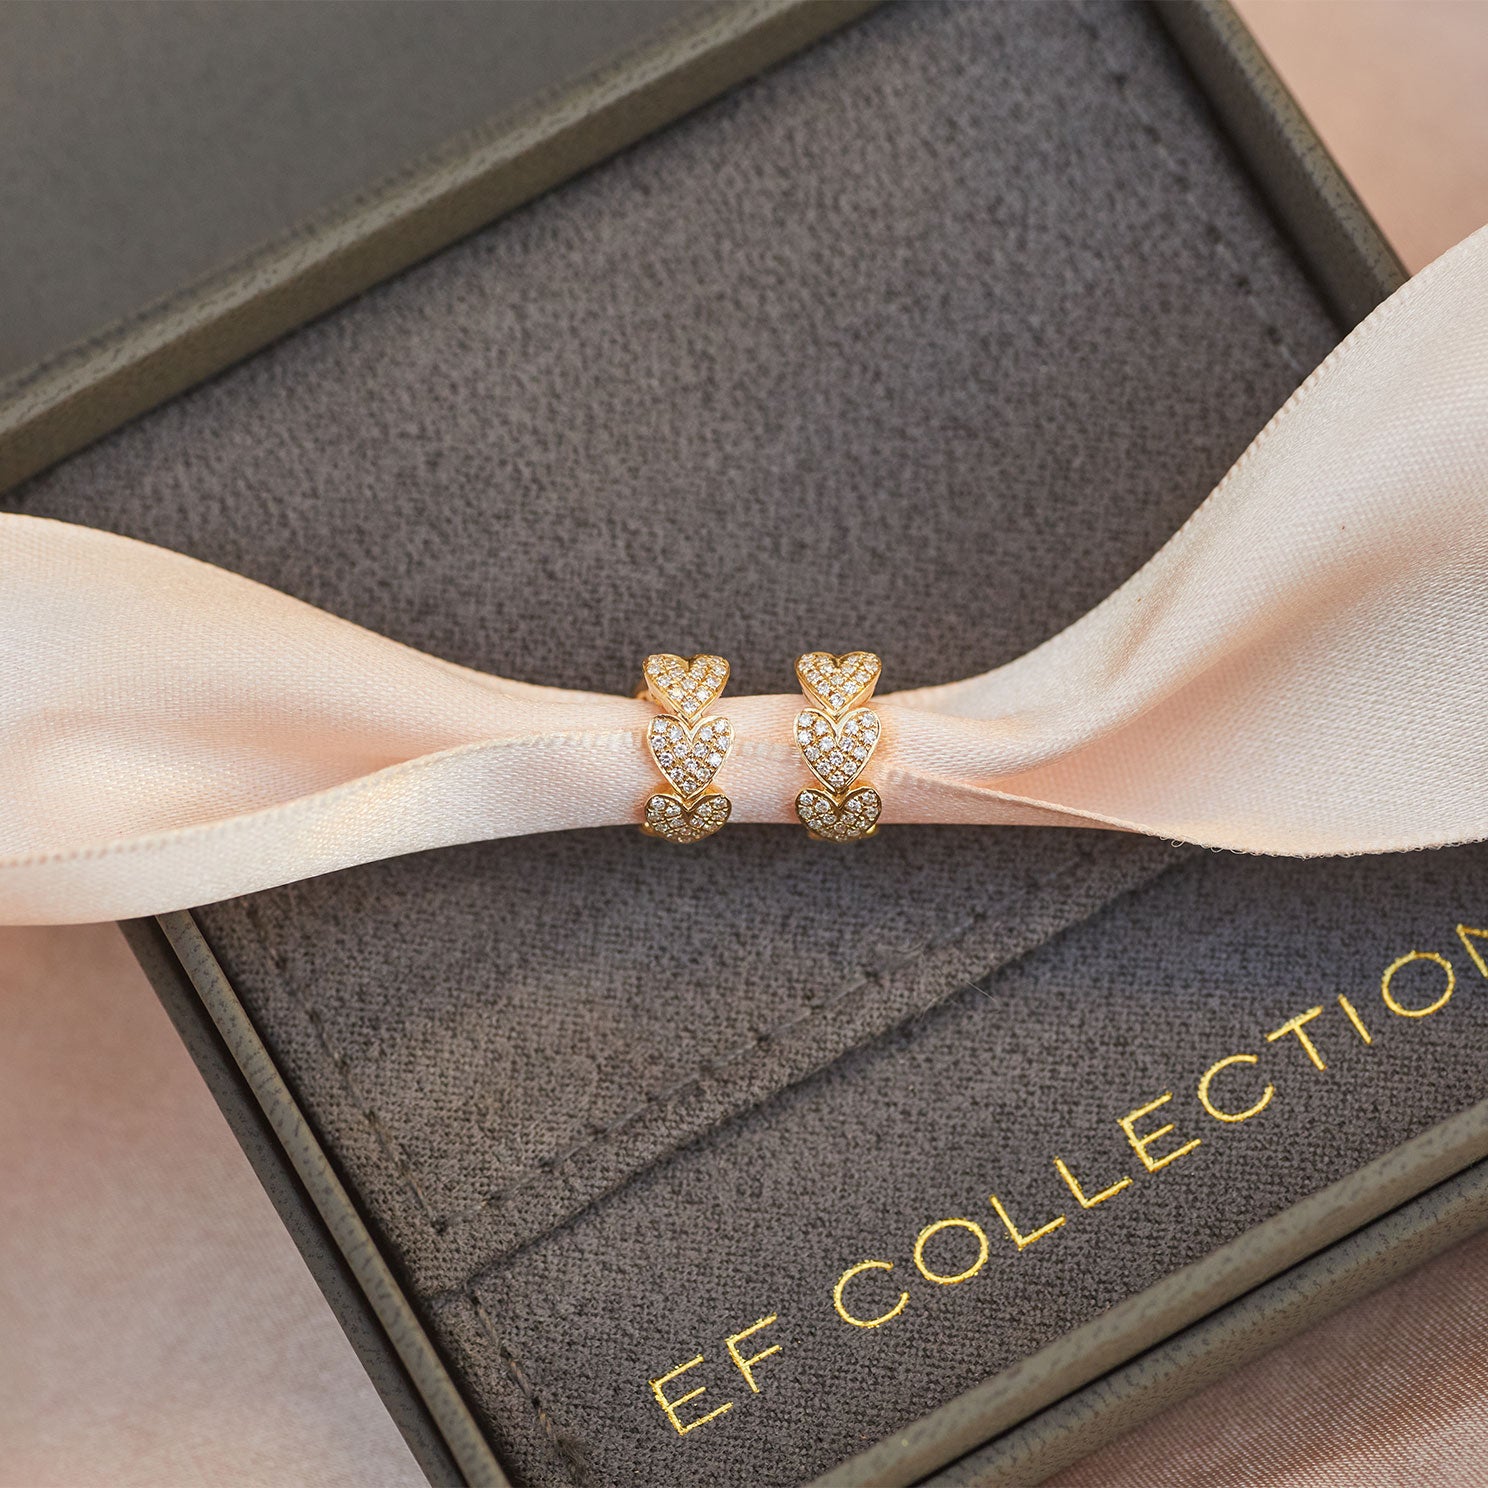 Diamond Multi Heart Huggie Earring in 14k yellow gold displayed on pink ribbon inside grey jewelry box with EF Collection logo in gold letters